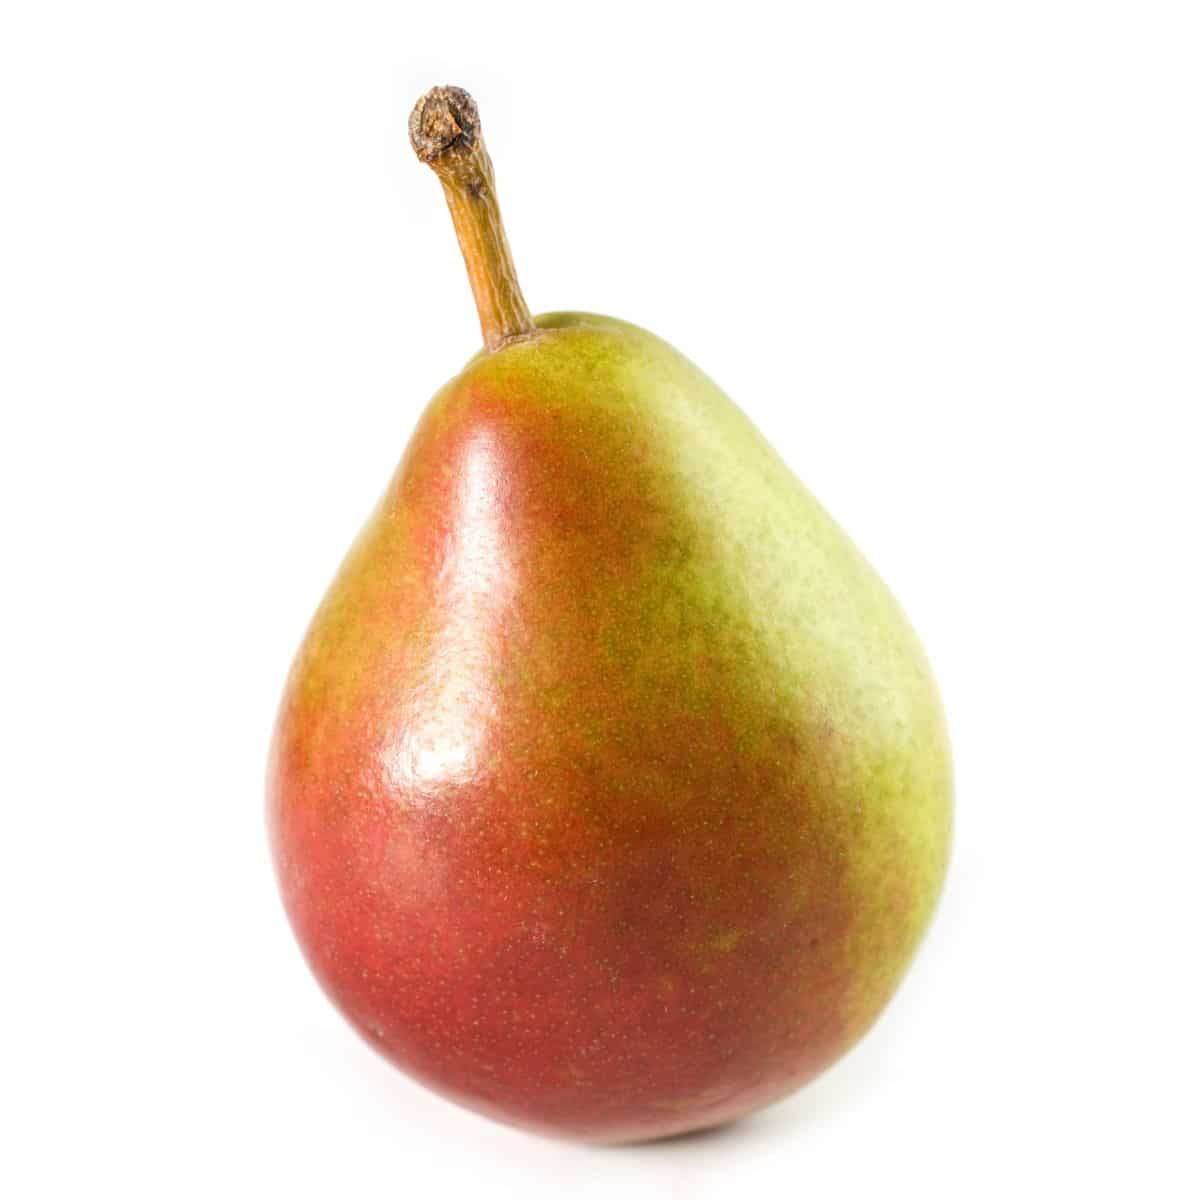 Seckel pear on a white background.